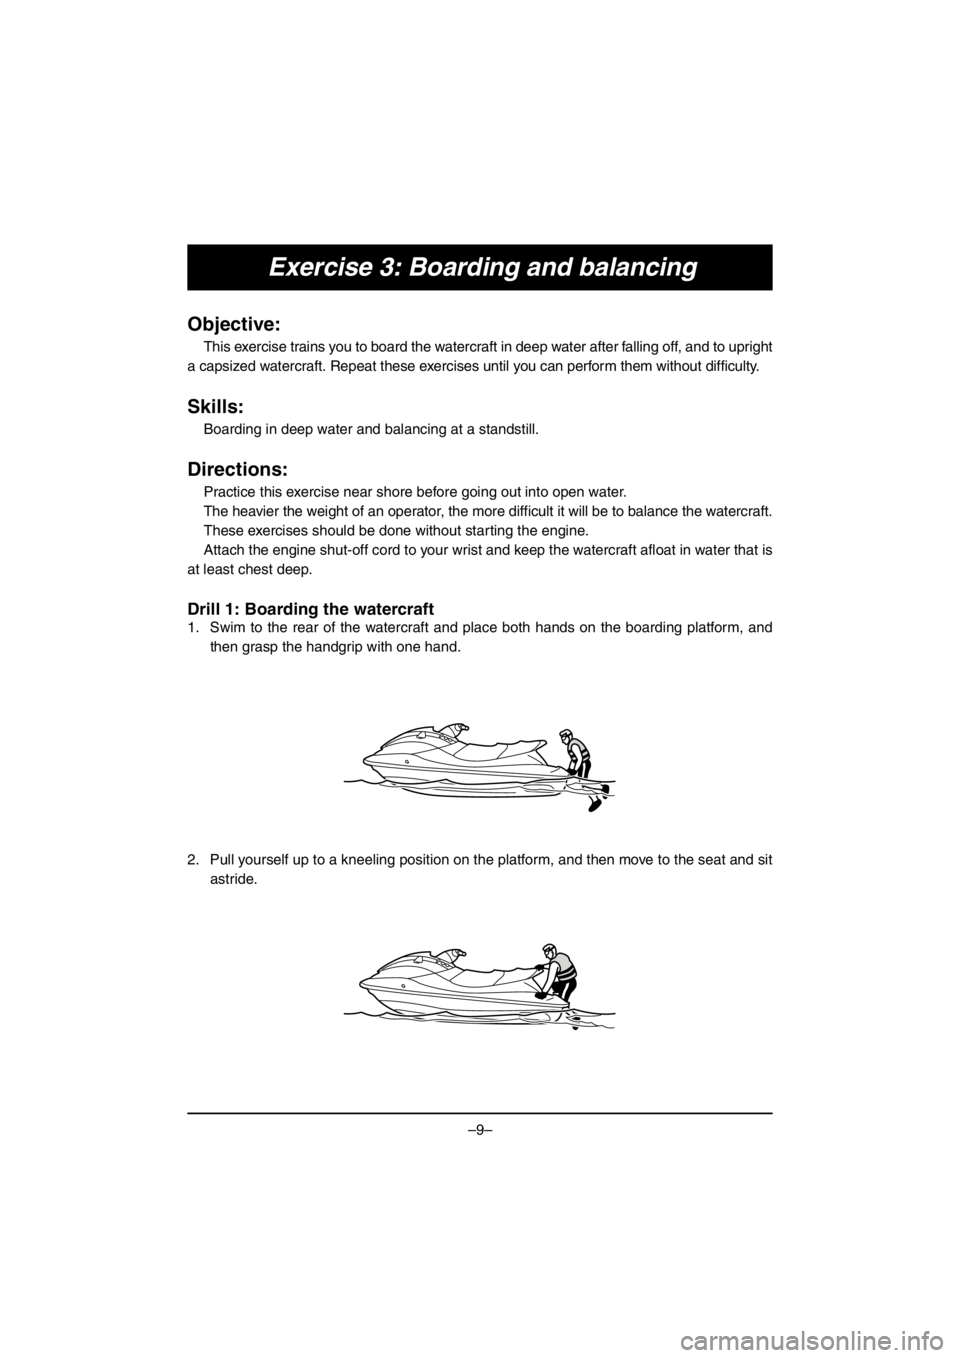 YAMAHA V1 2016 User Guide –9–
Exercise 3: Boarding and balancing
Objective:
This exercise trains you to board the watercraft in deep water after falling off, and to upright
a capsized watercraft. Repeat these exercises unt